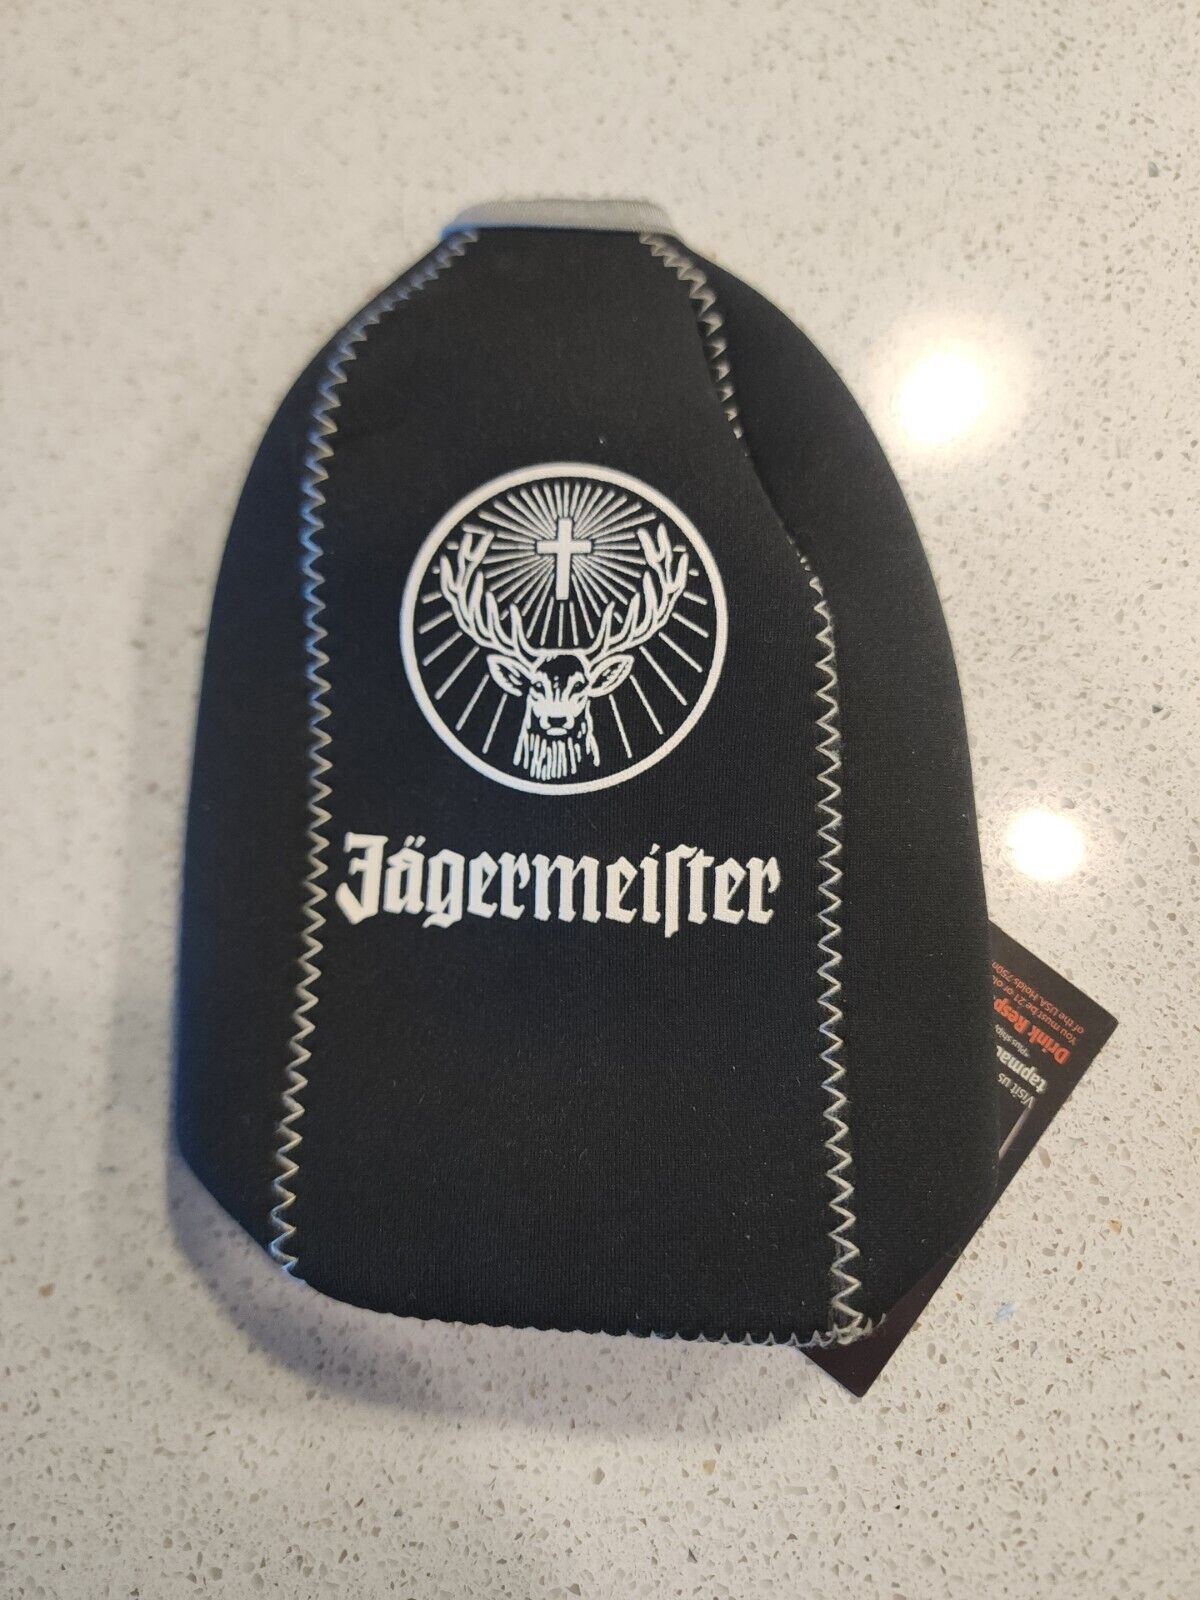 Jagermeister The Stag Zippered Bottle Holder/Carrier Foam Stay Cool Pack